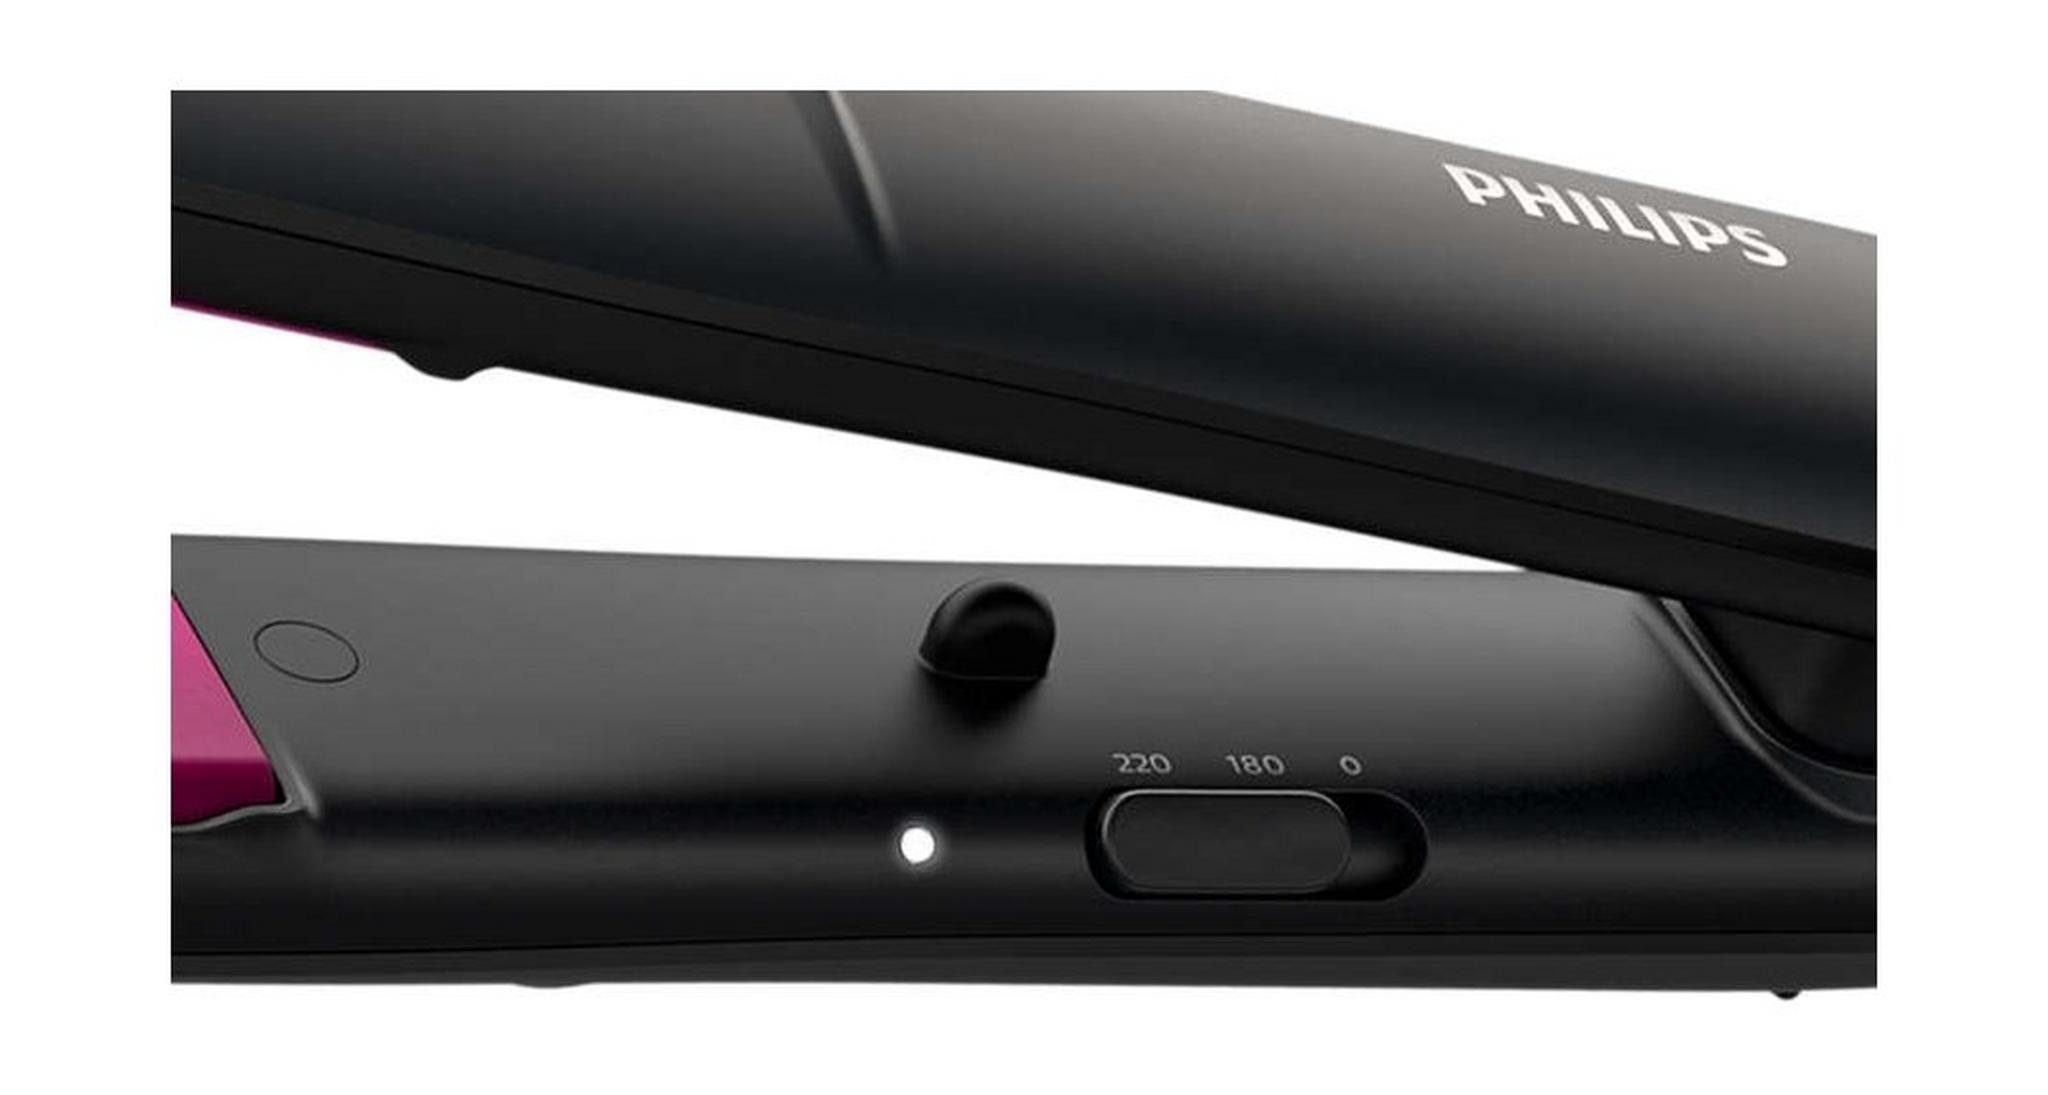 Philips ThermoProtect  Hair Straightener - (BHS375/03)